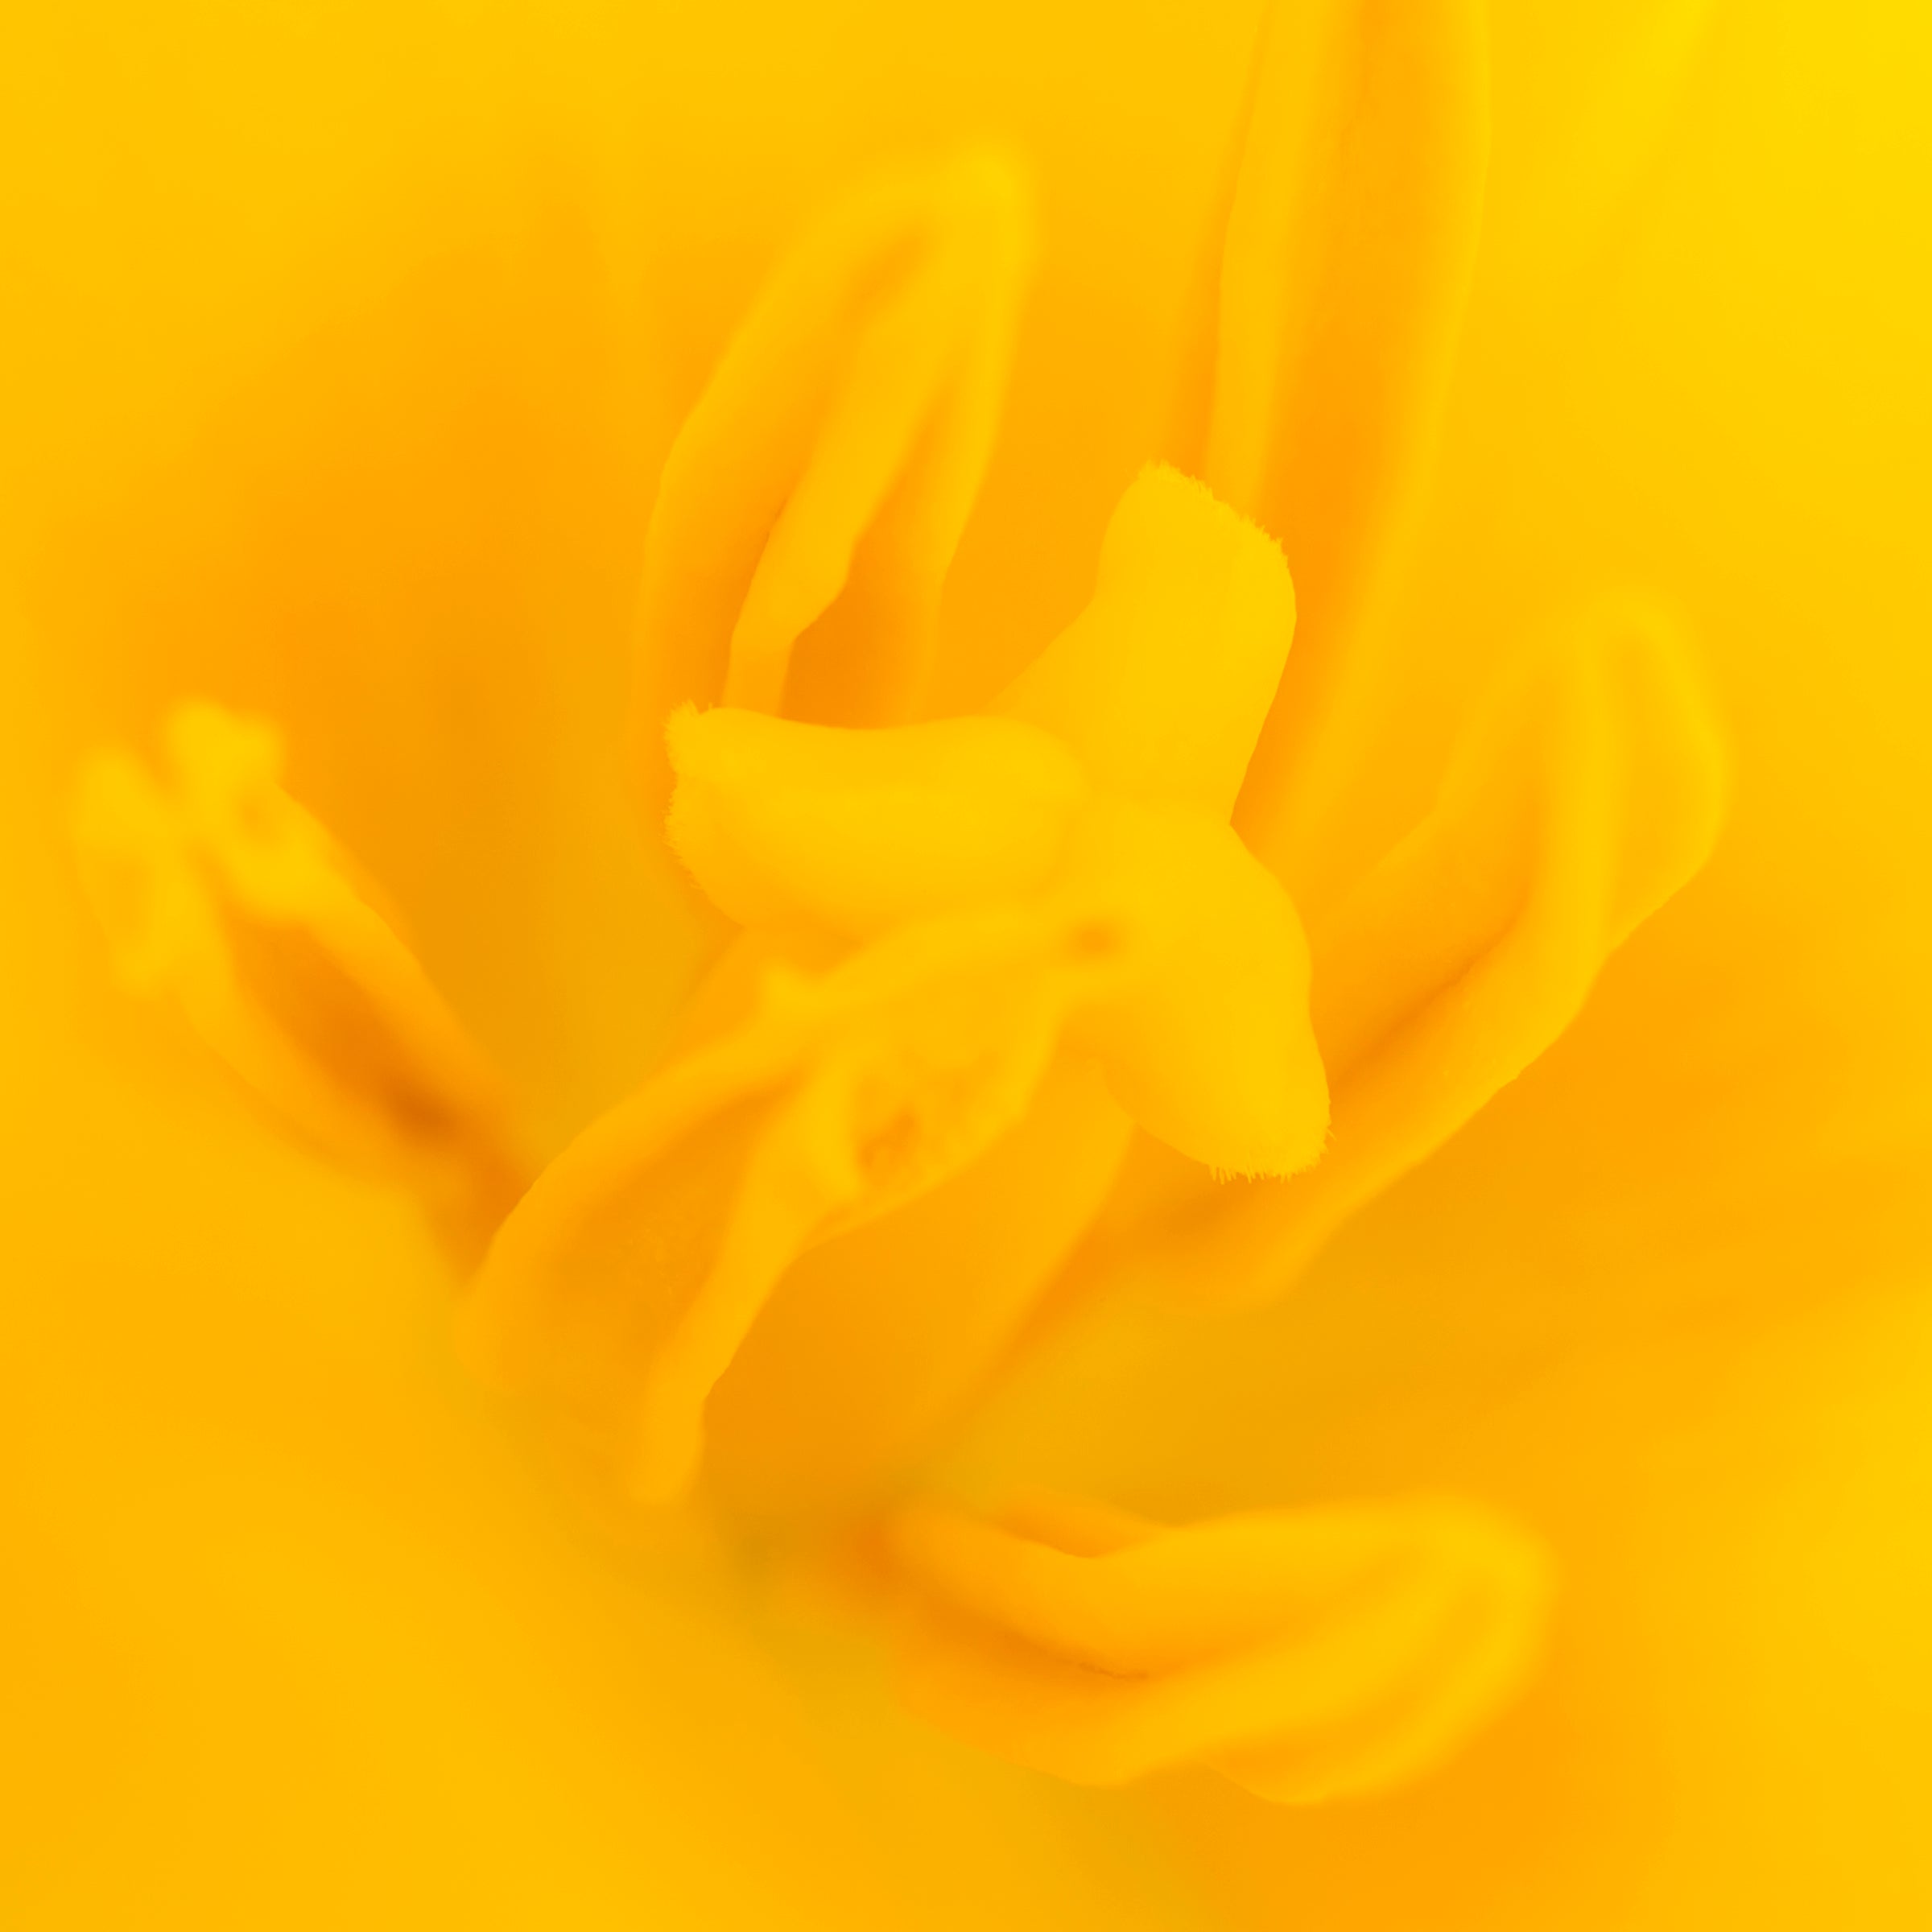 square photo very close up of inner part of yellow flower